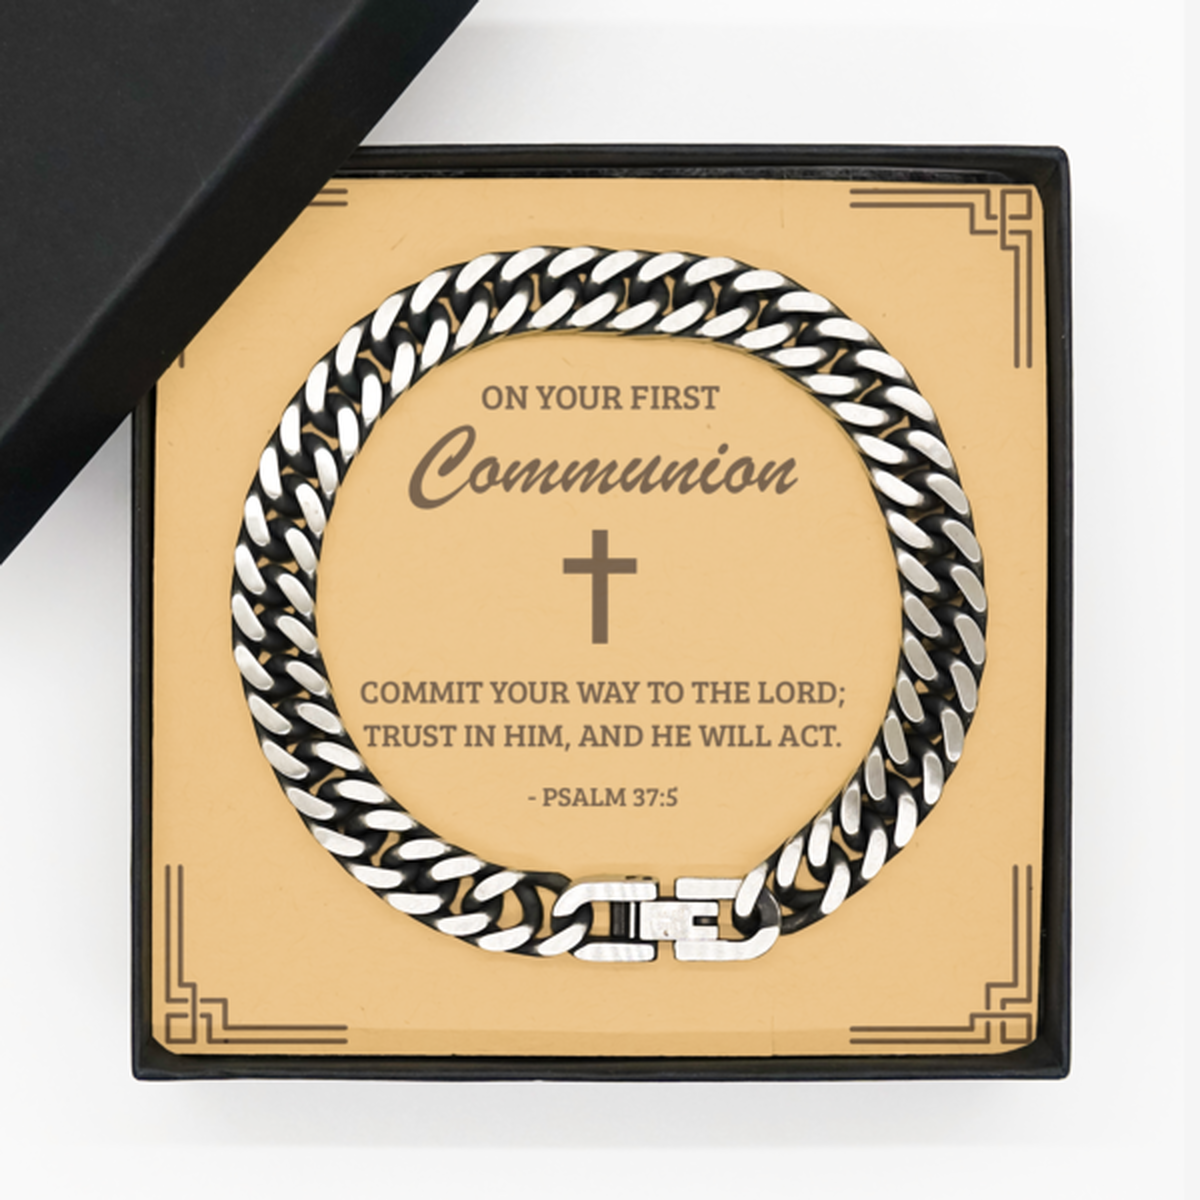 First Communion Gifts for Teenage Boys, Commit your way to the Lord, Cuban Link Chain Bracelet with Bible Verse Message Card, Religious Catholic Bracelet for Son, Grandson, Dad, Godfather